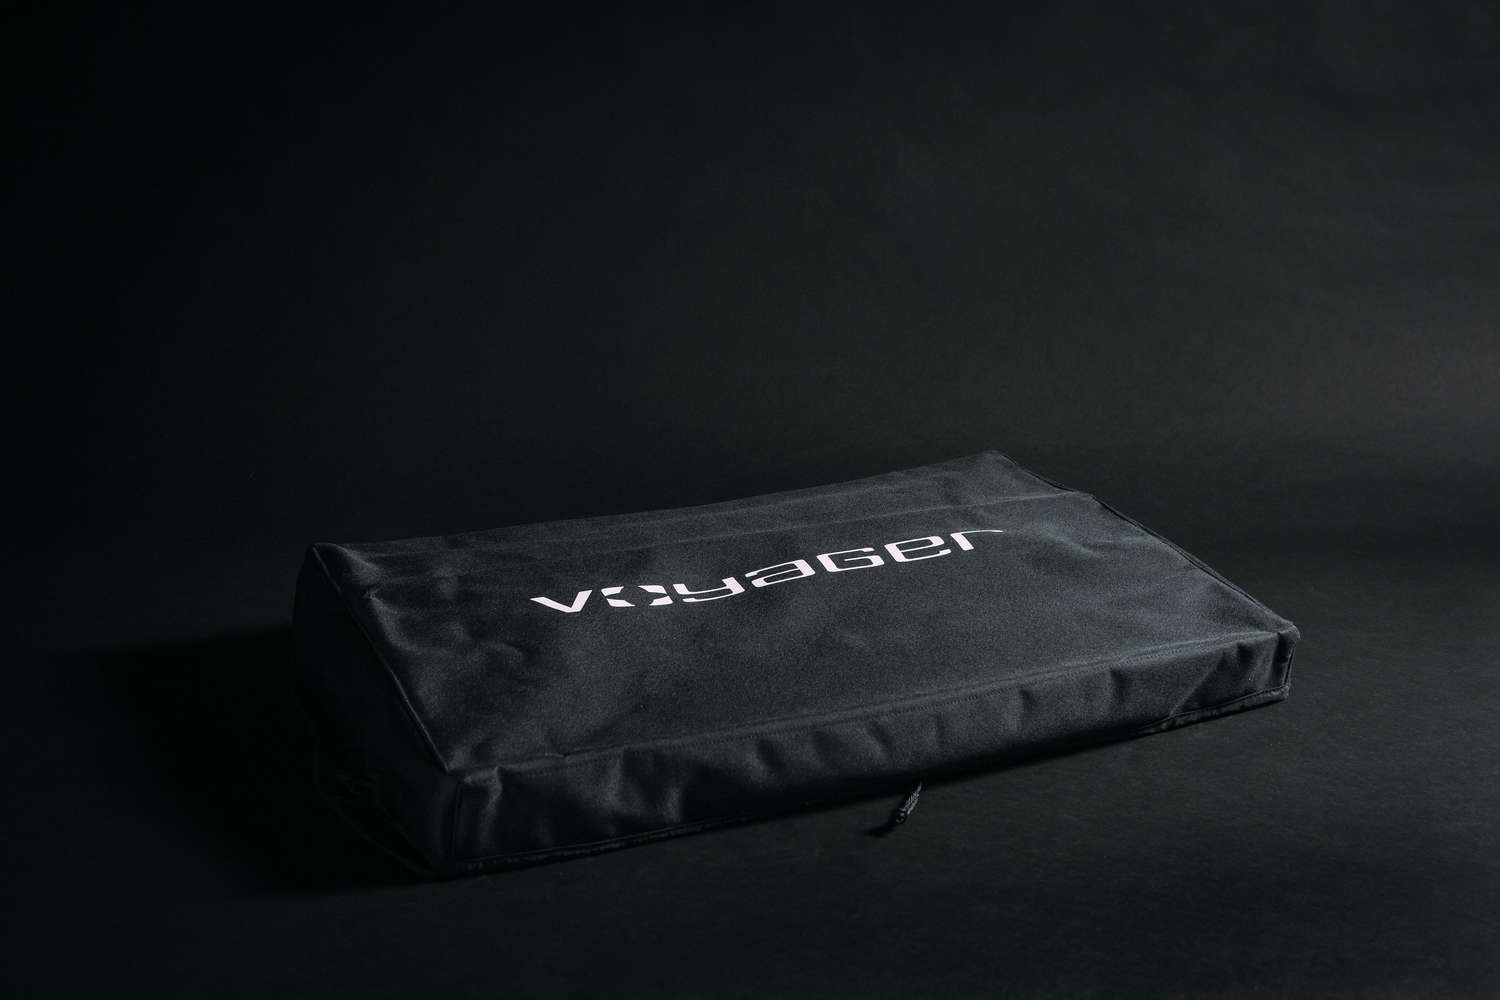 minimoog voyager dust cover